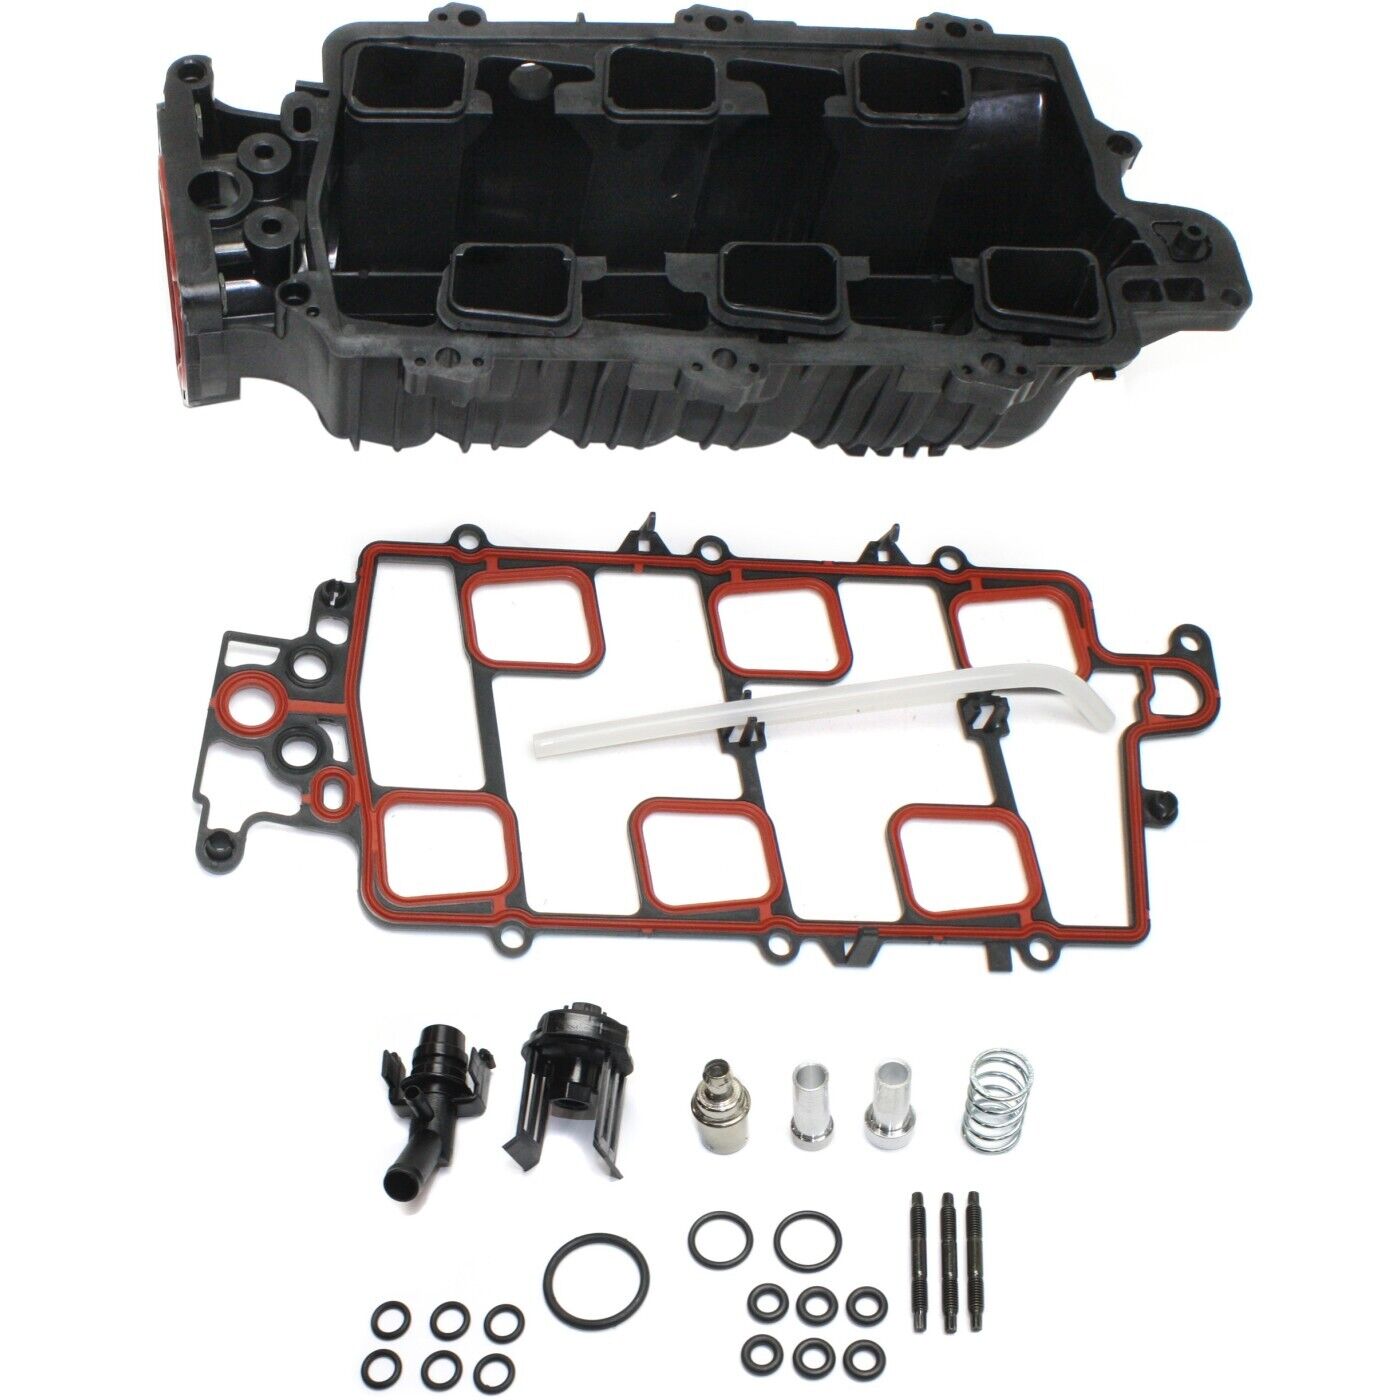 Upper Intake Manifold w/ Gasket for 95-05 Chevy Buick Olds 3800 3.8L V6